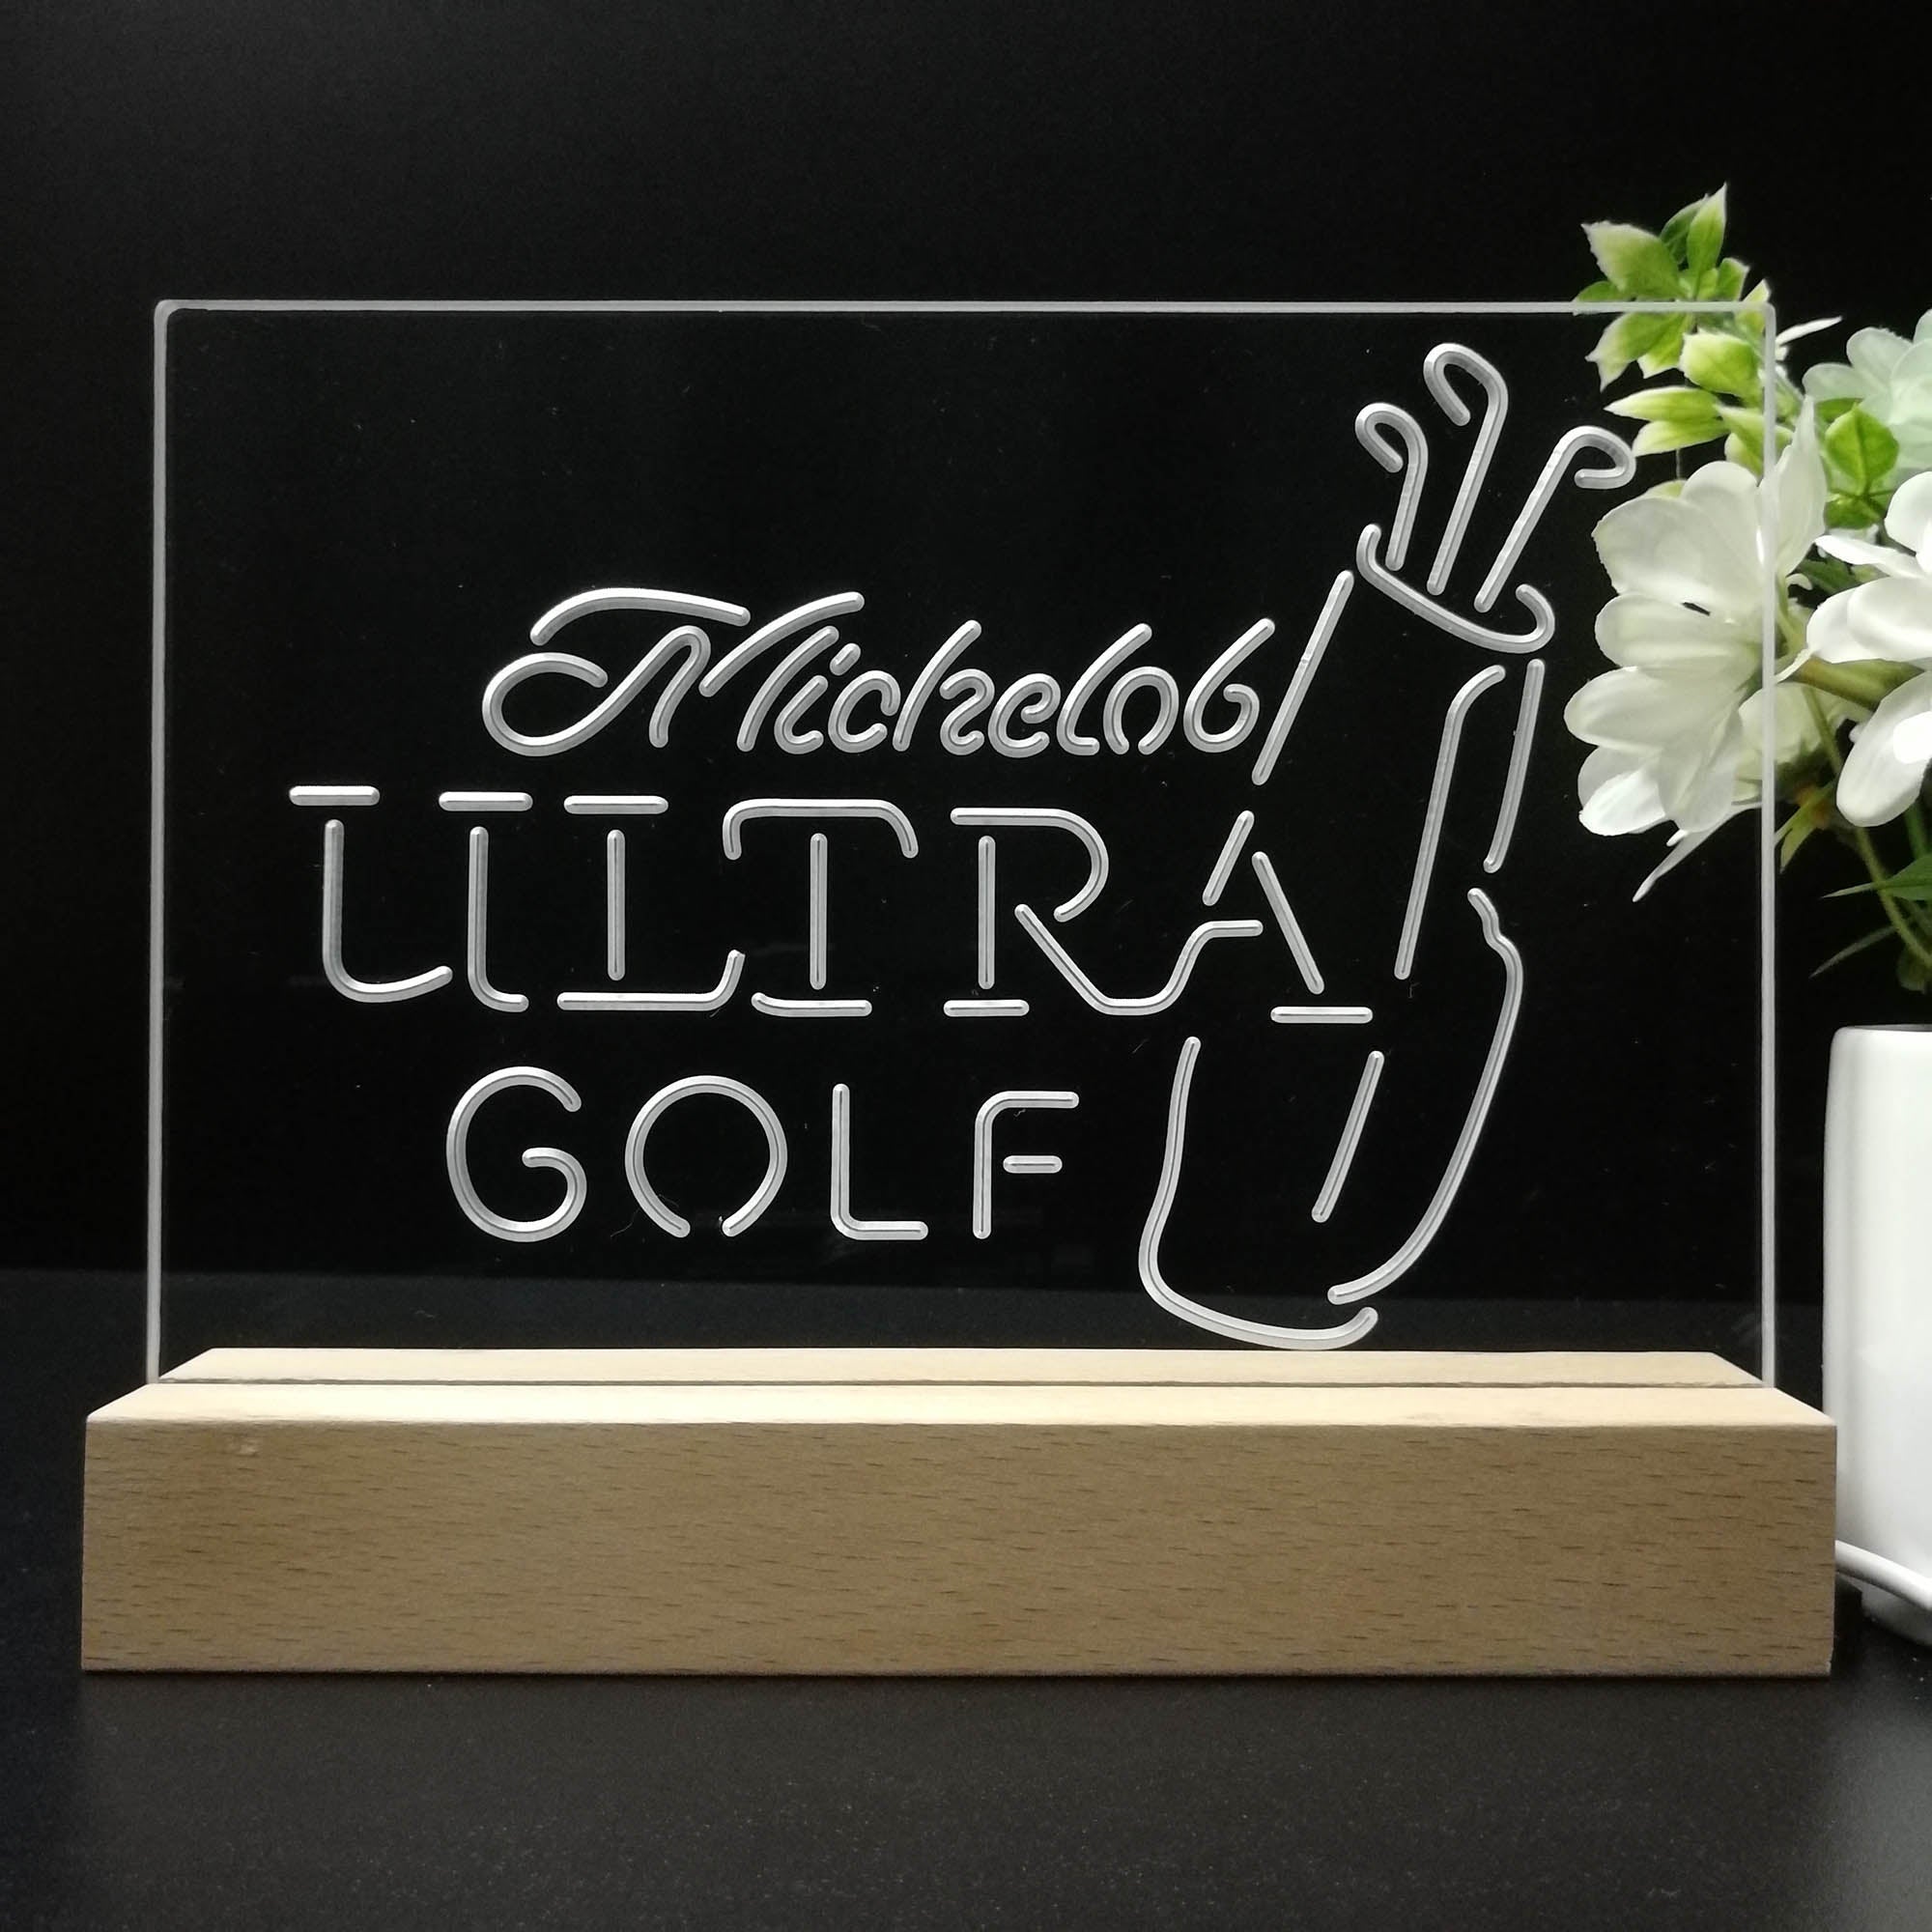 Michelobs Ultra Golf Bag Beer Bar Decoration Gifts Night Light LED Sign